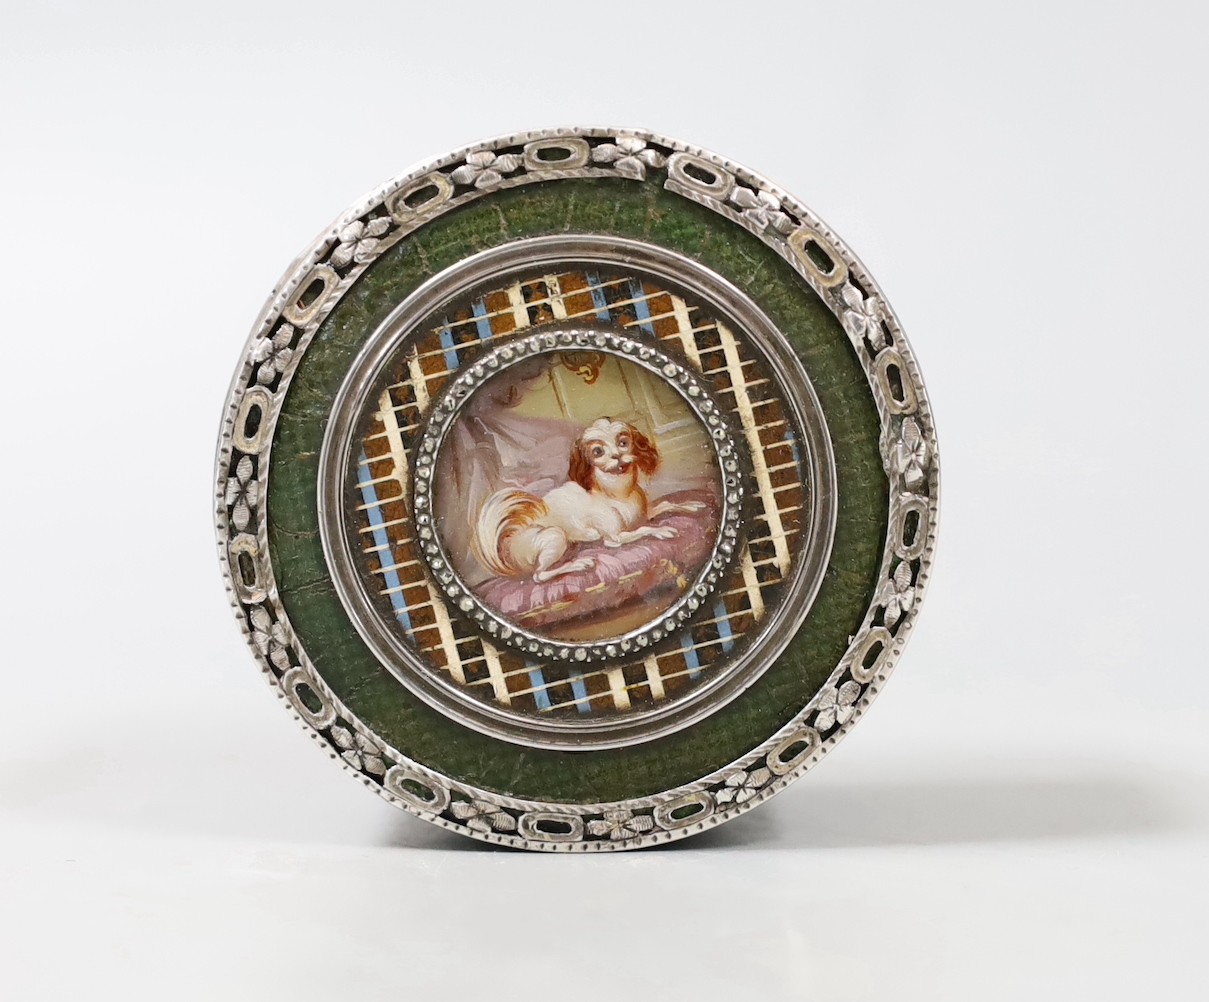 A 19th century King Charles Spaniel miniature inset into a leather and silver mounted tortoiseshell interior box. 6.5cm diameter